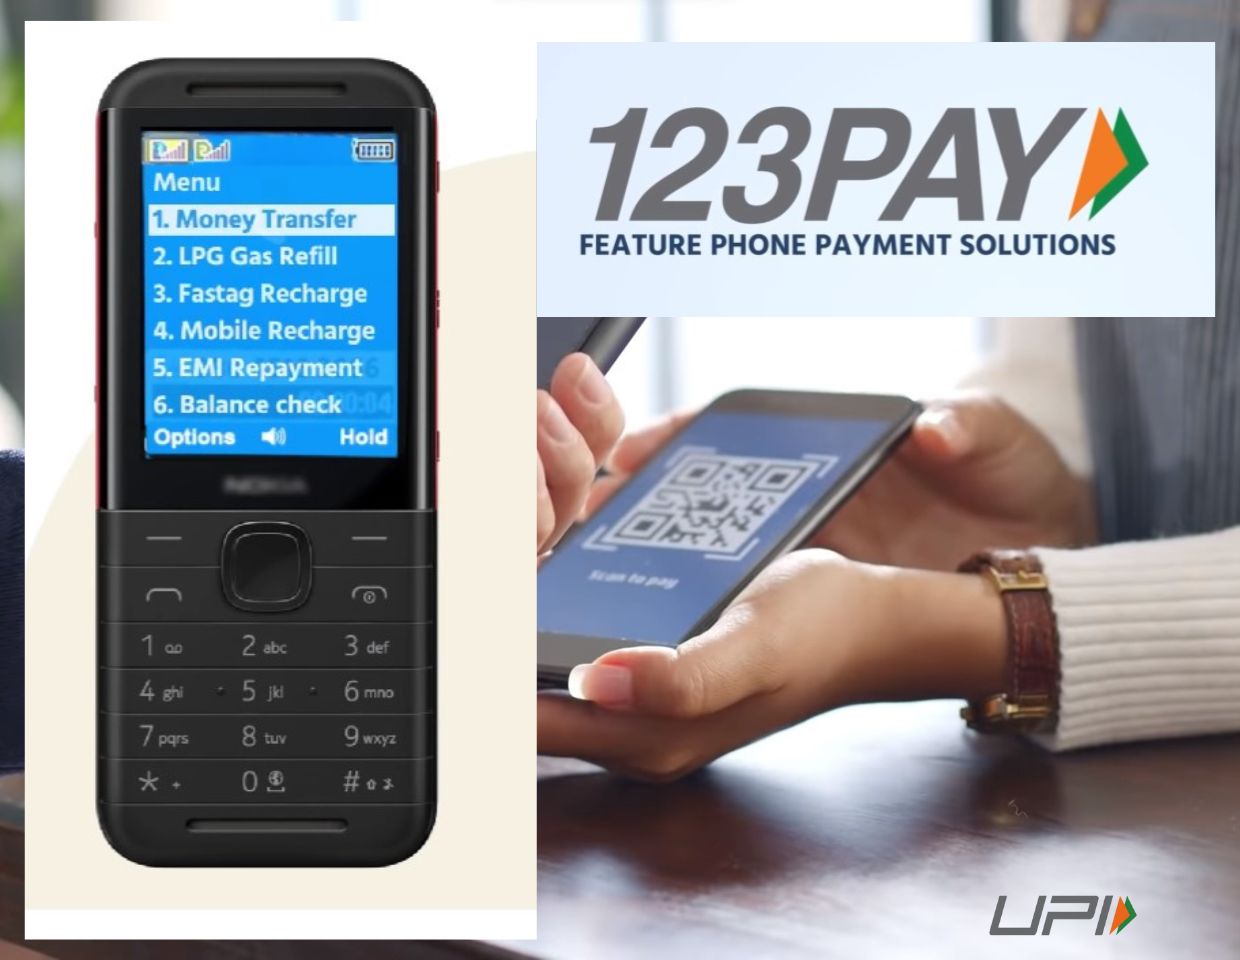 digital payment for feature mobile phone